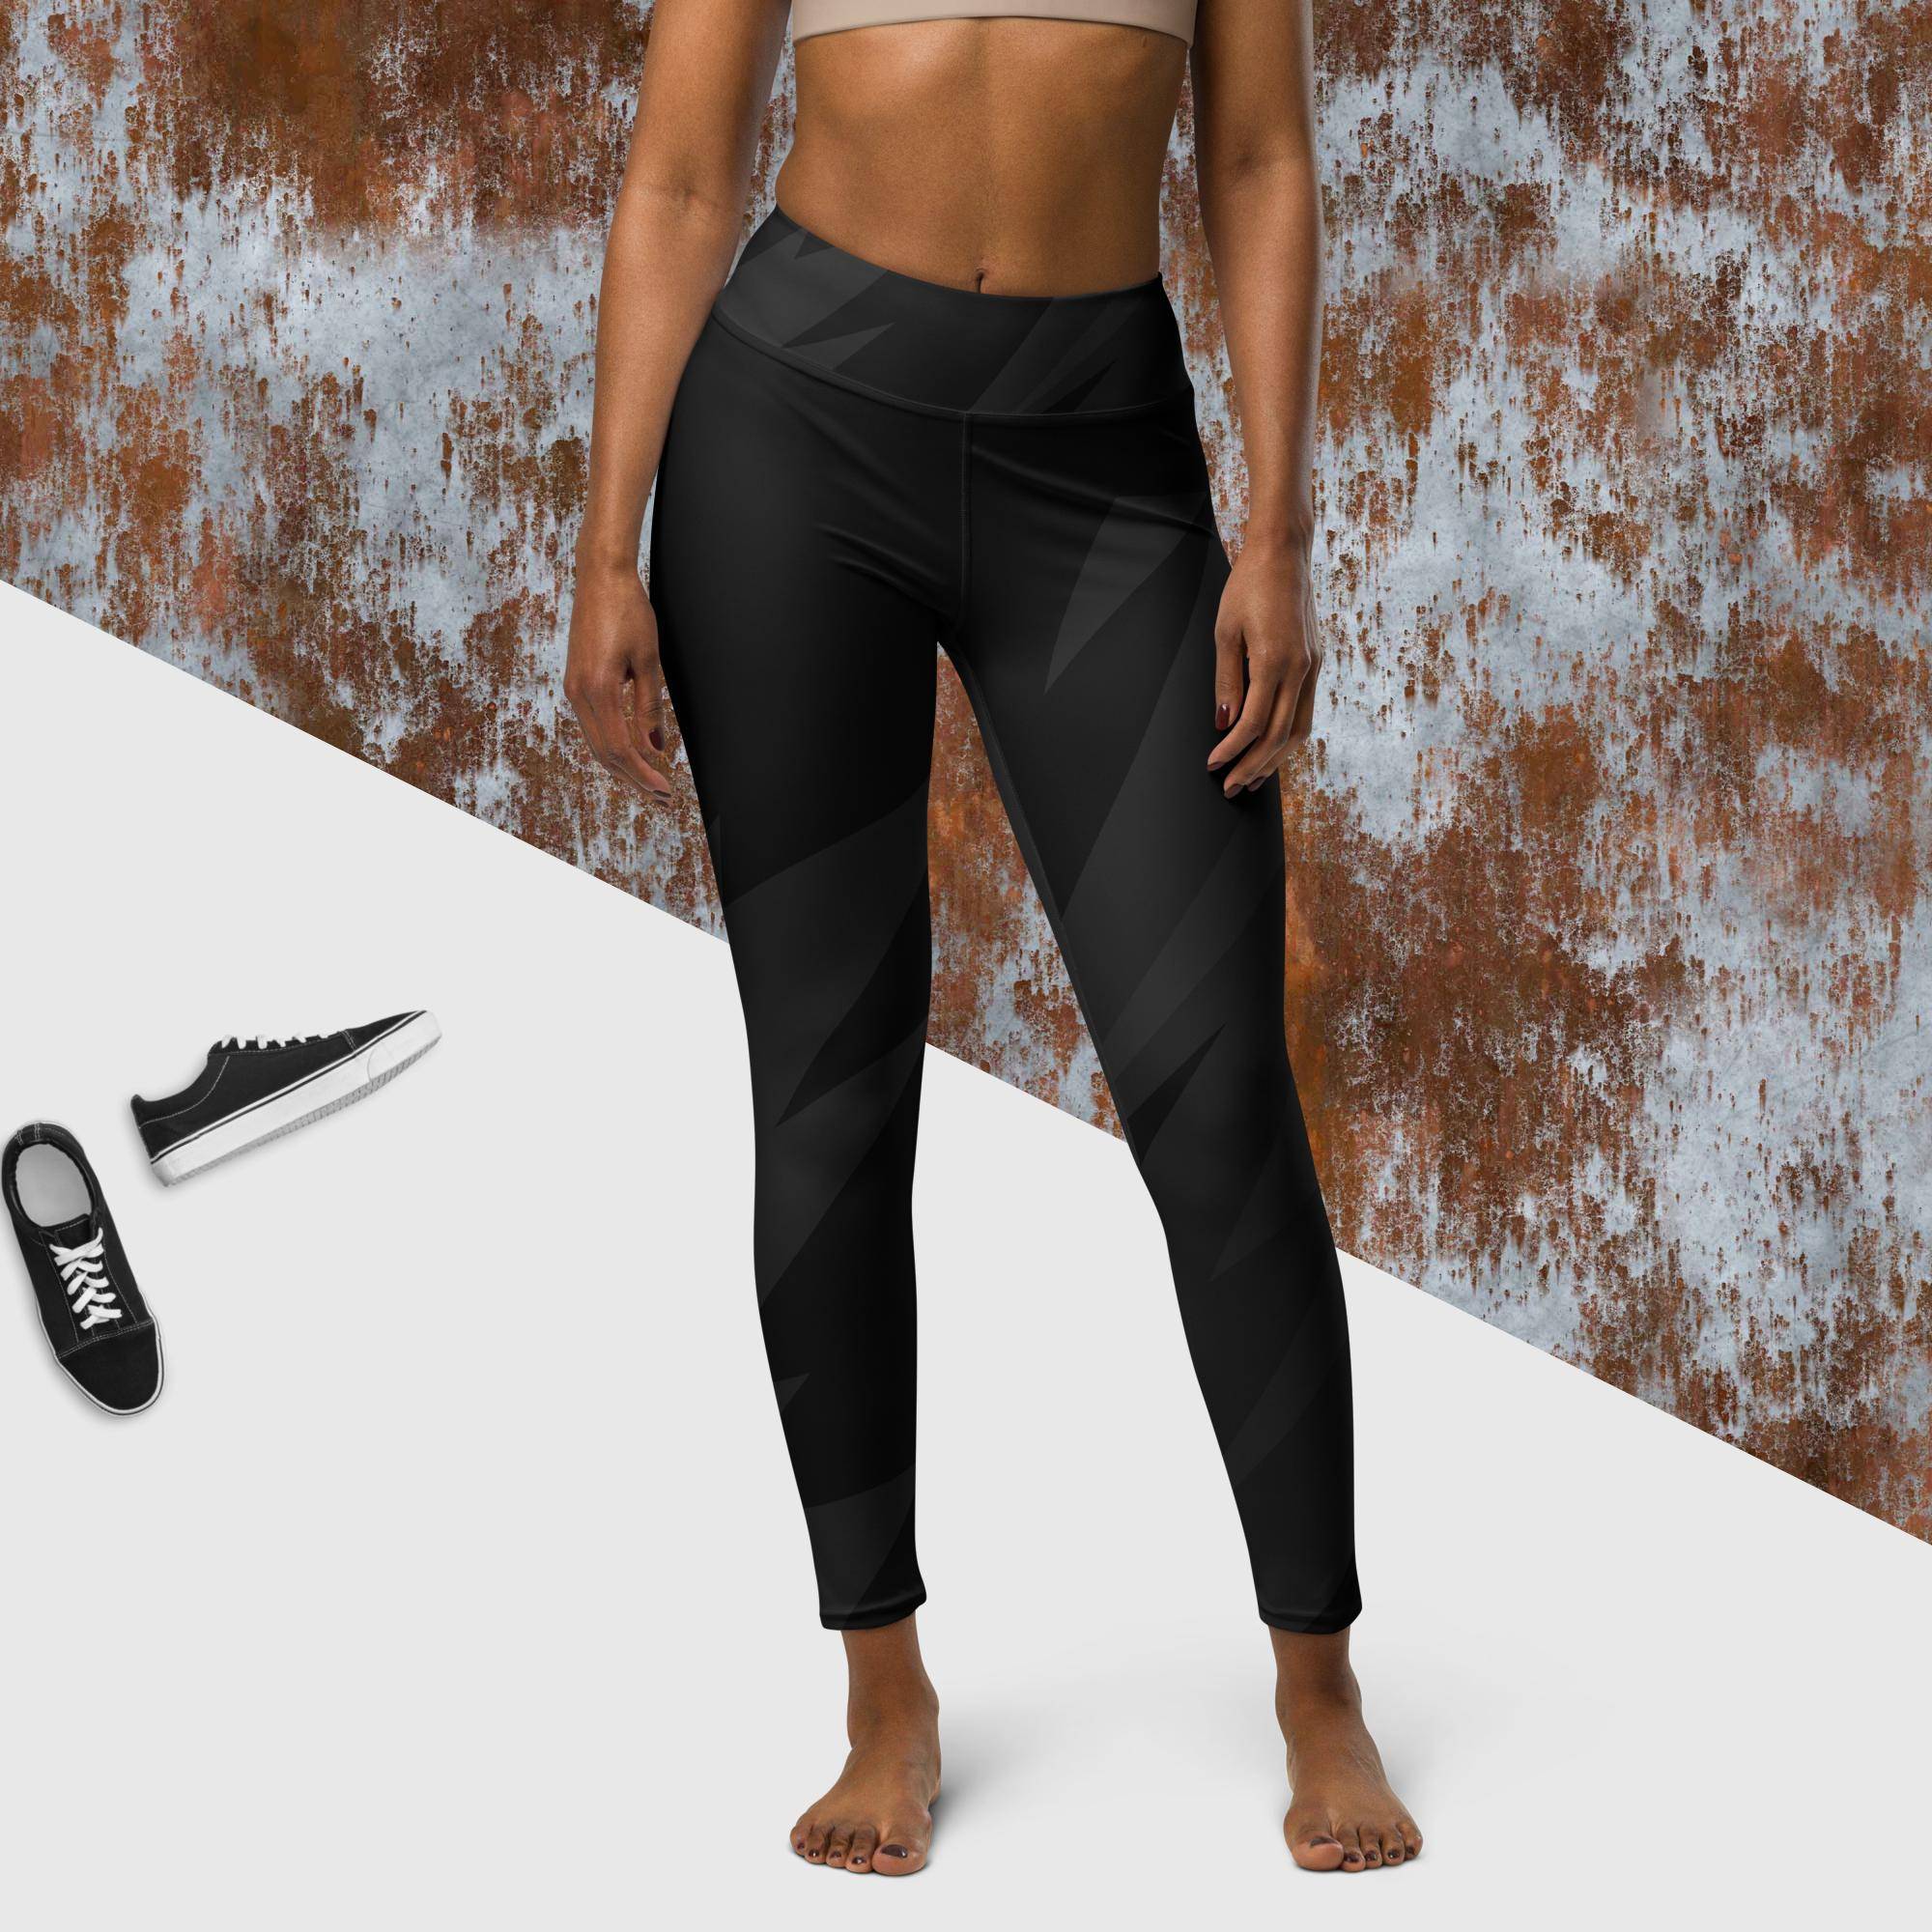 Women High Waist Yoga Pants (No compromise in quality)